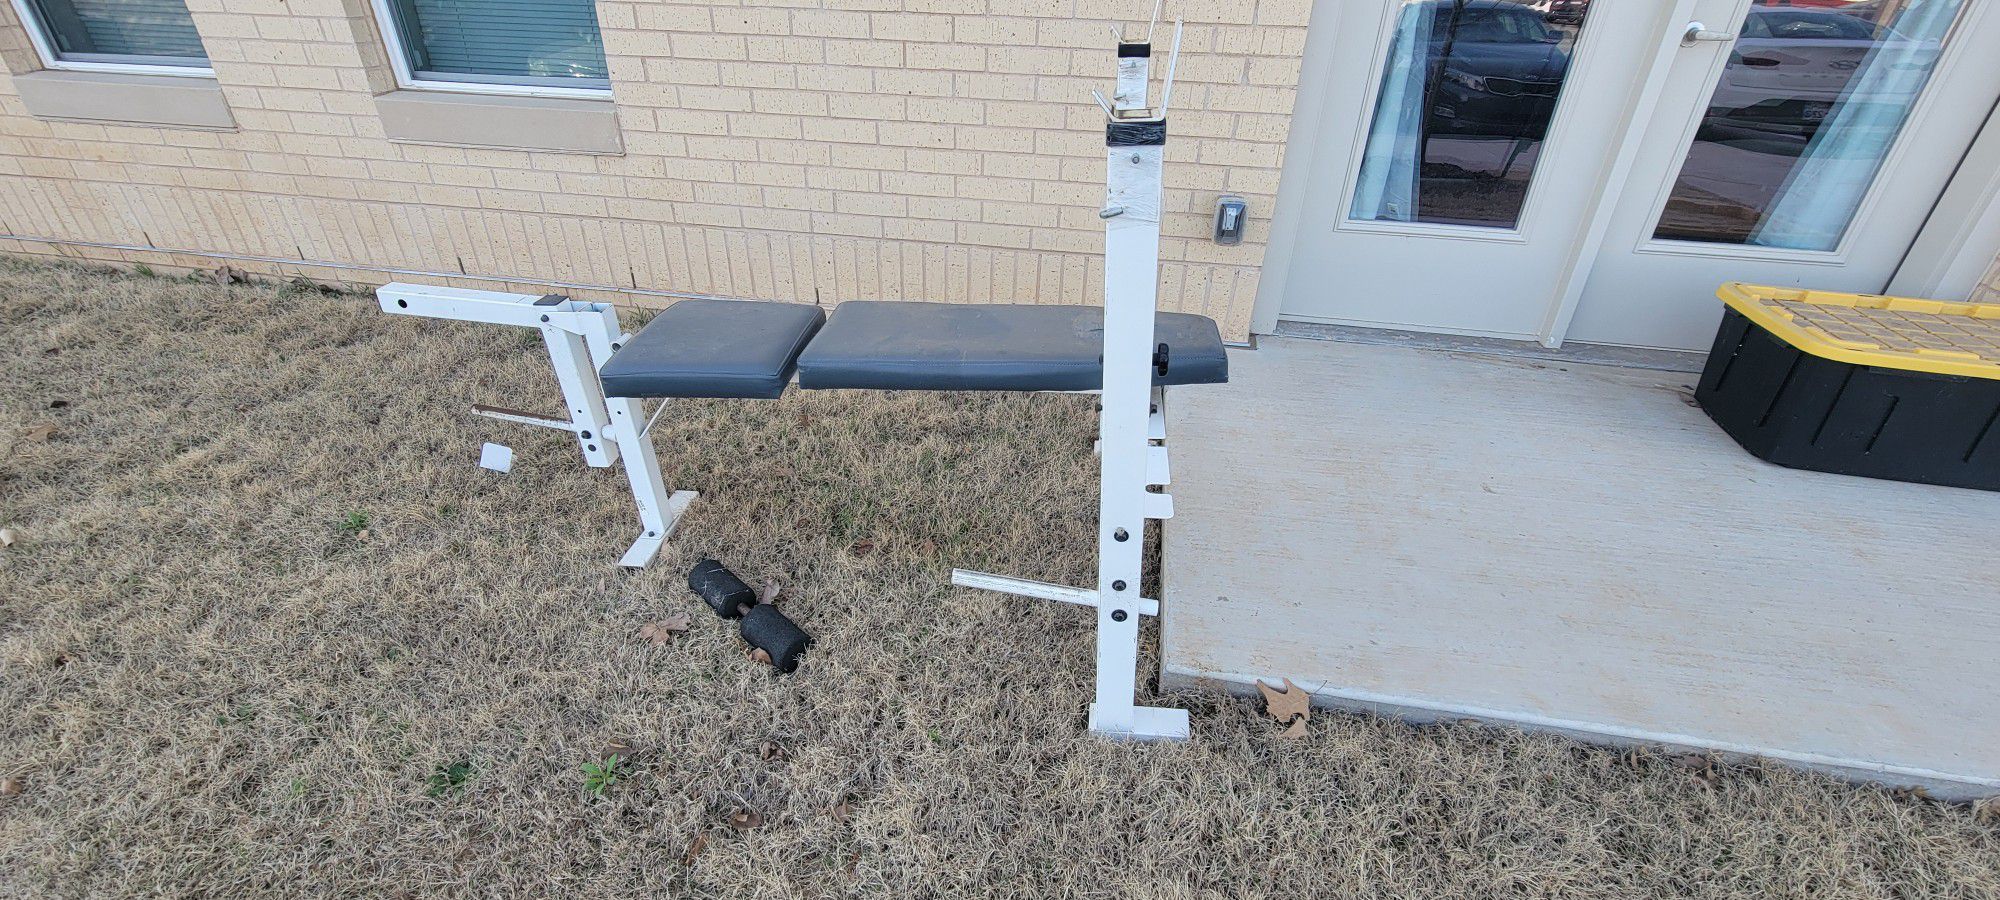 Weight Lifting Bench And Plates